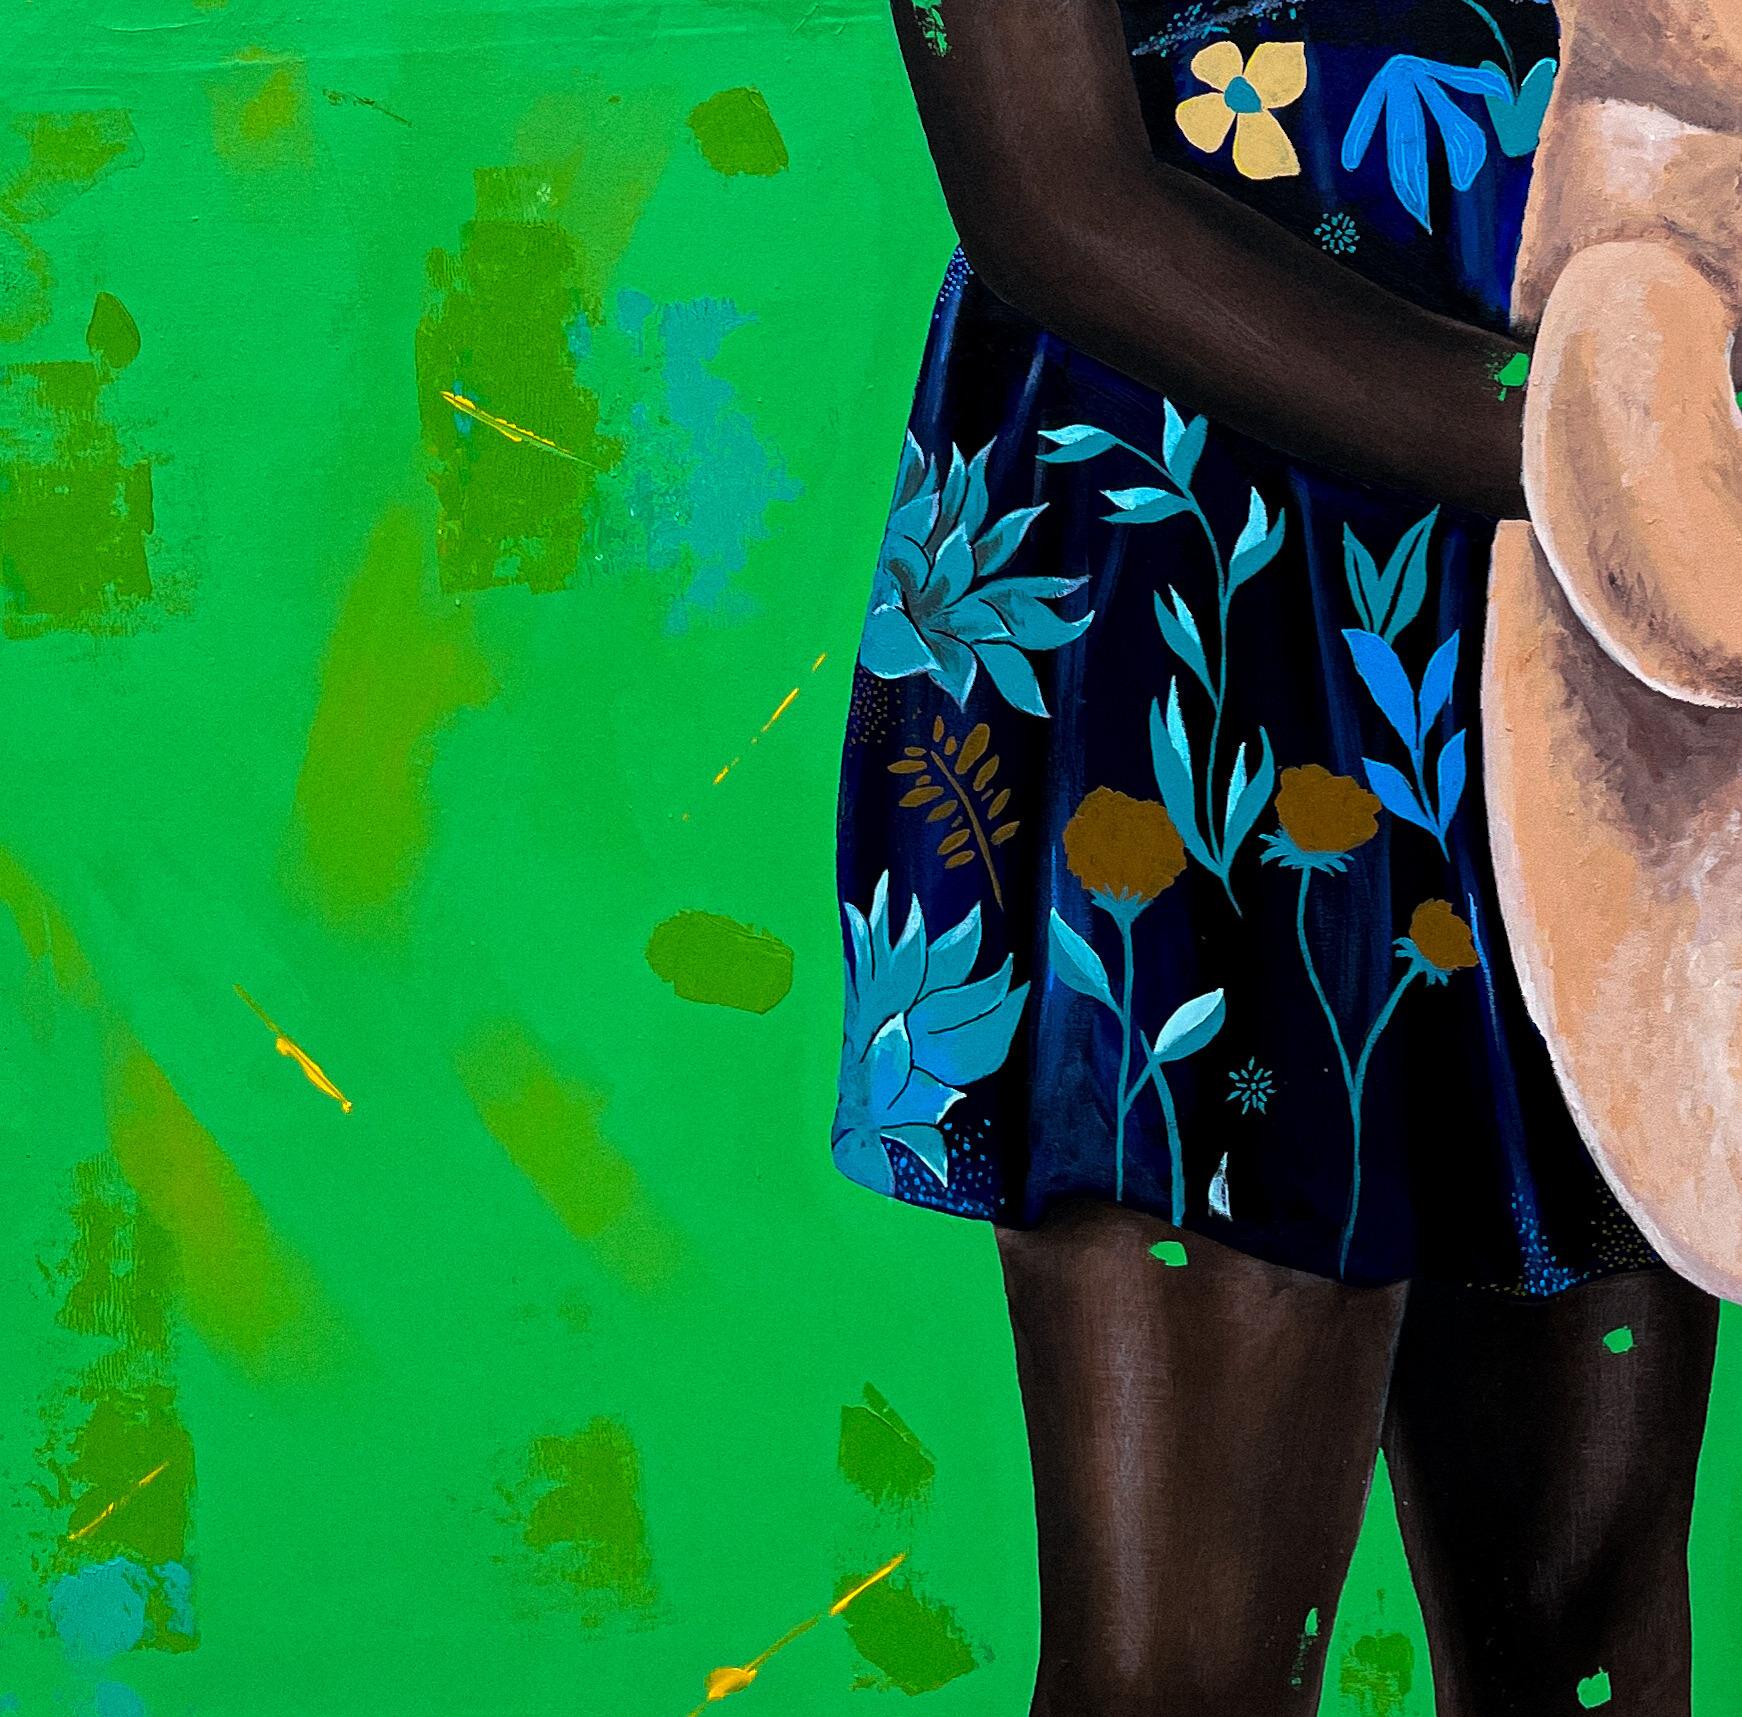 Girl Child and Her Companion 2 - Contemporary Painting by Eyitayo Alagbe